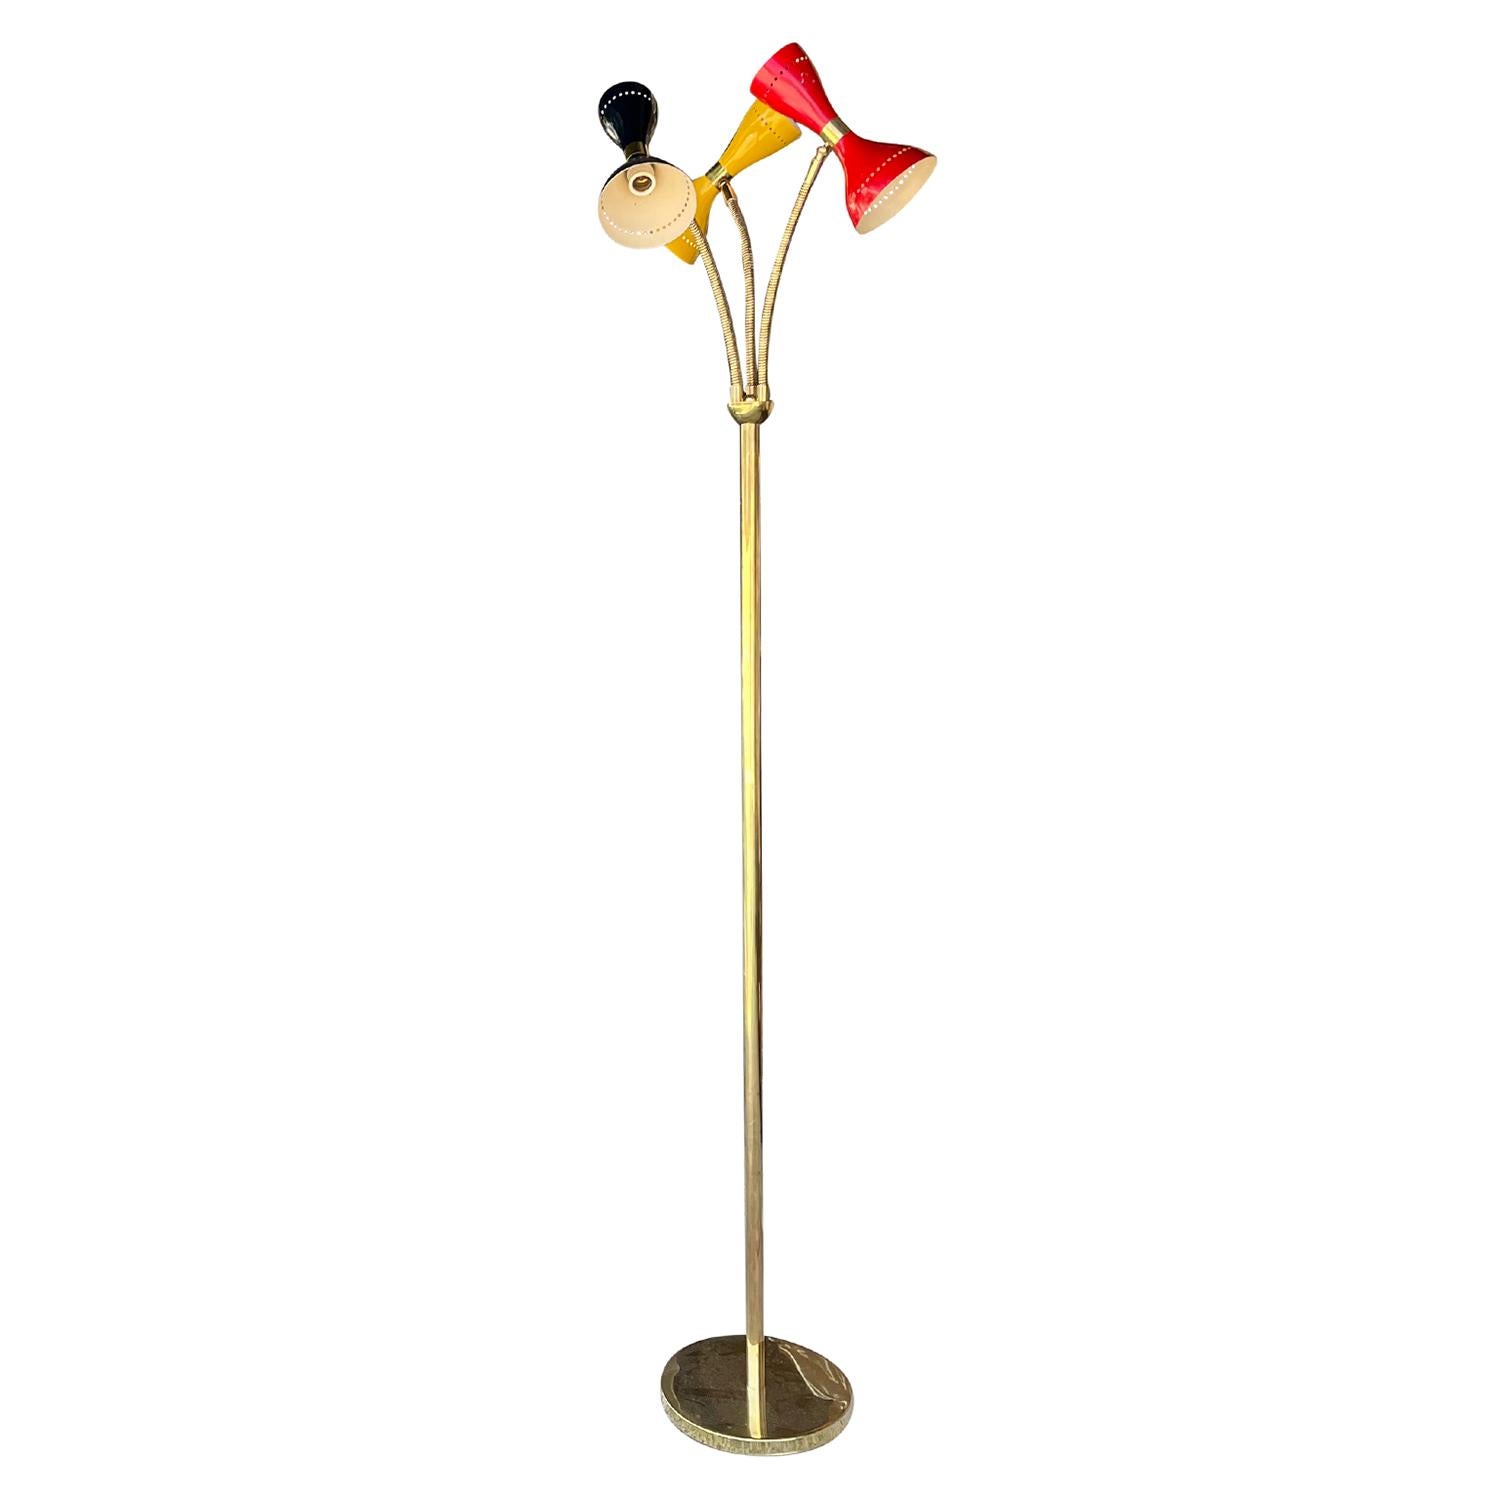 A tall colorful, vintage Mid-Century Modern Italian floor lamp made of hand crafted metal and brass, composed with one black, yellow and a red shade, produced by Stilnovo in good condition. The three conical mount, perforate metal shades are